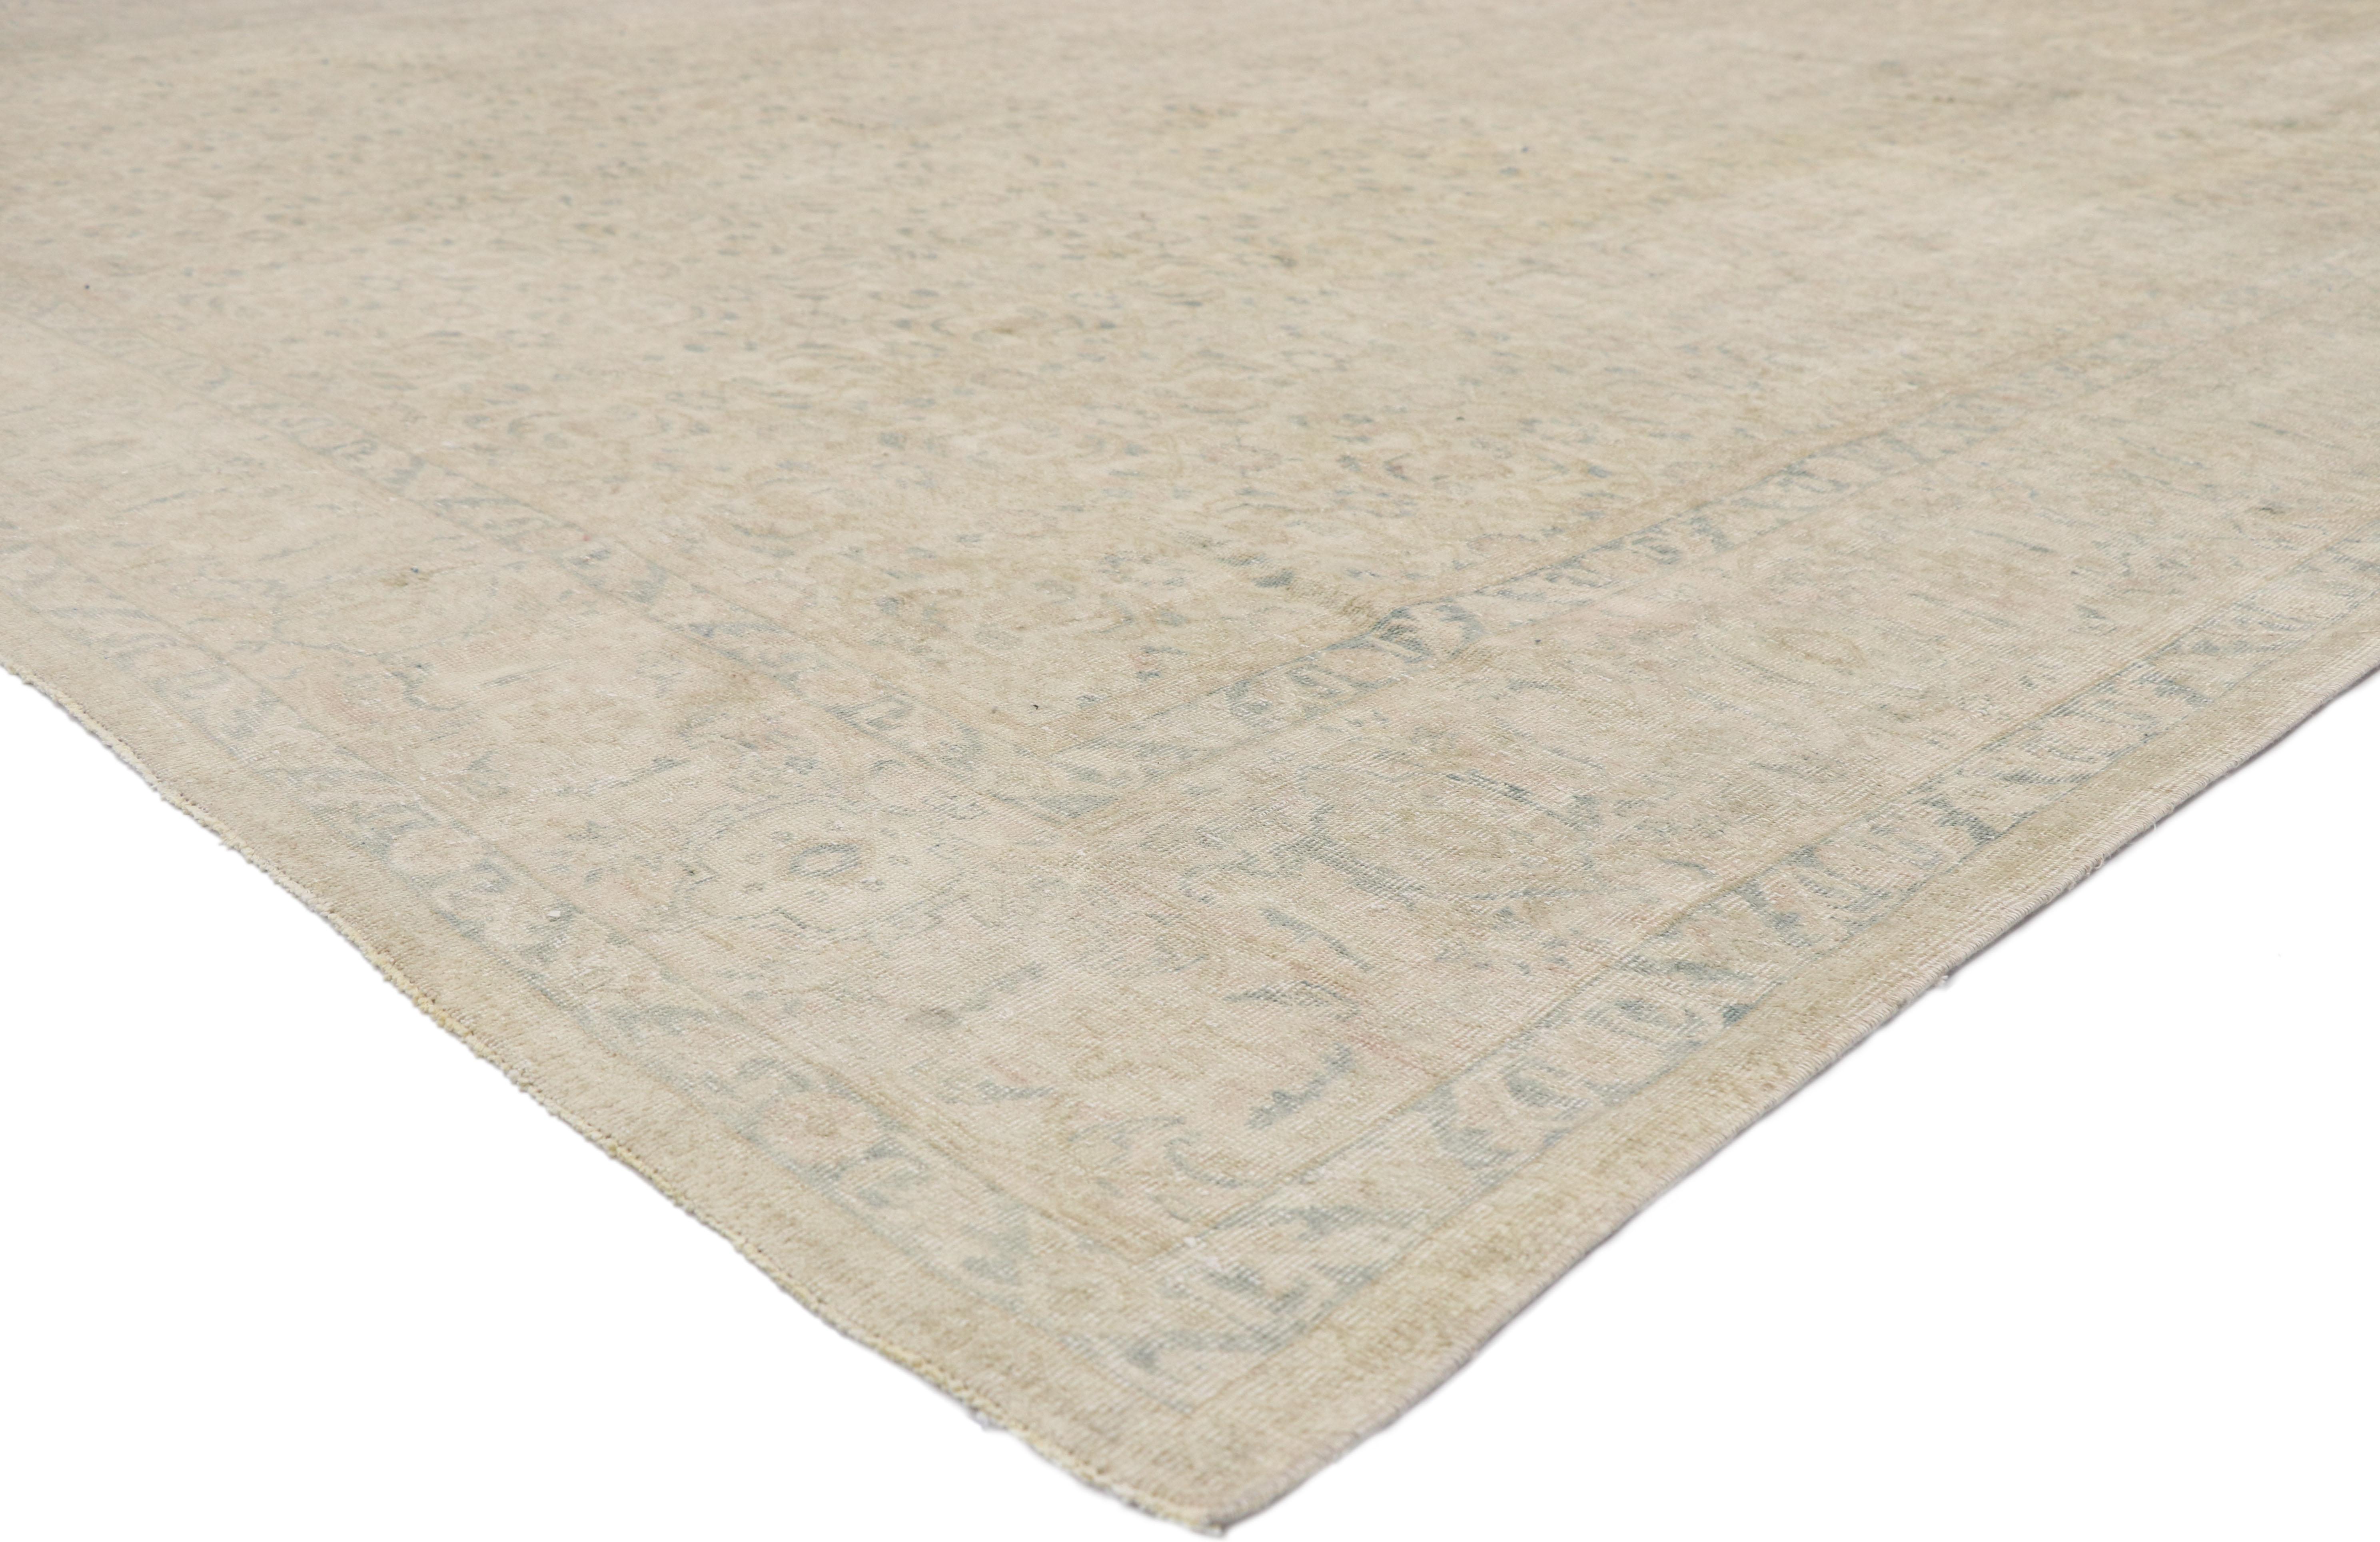 52663, distressed vintage Turkish Sivas rug with modern rustic Cotswold Cottage style. With its soft, subtle hues and cozy simplicity, this hand knotted wool distressed vintage Turkish Sivas rug charms with ease and beautifully embodies Cotswold